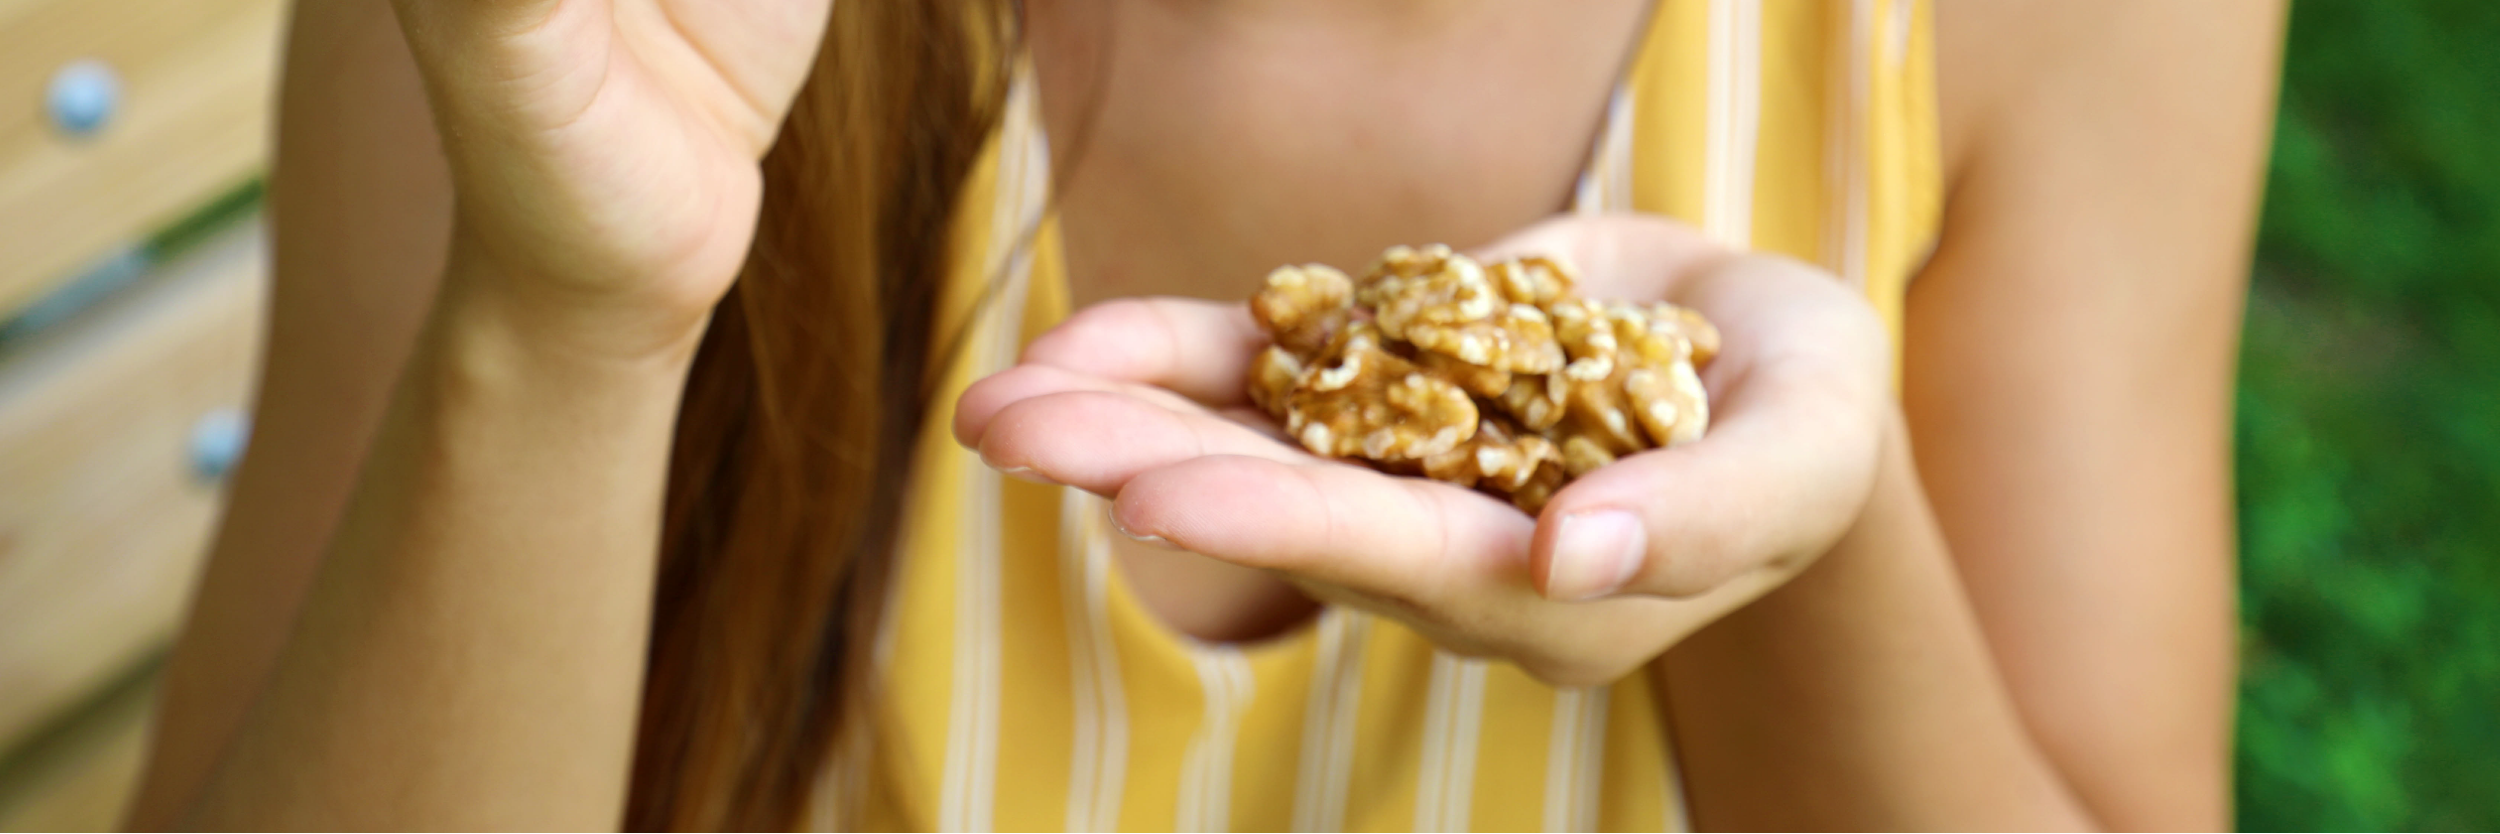 Mixed nuts can be additive and portion control is important which is about a handful amount for daily intake.